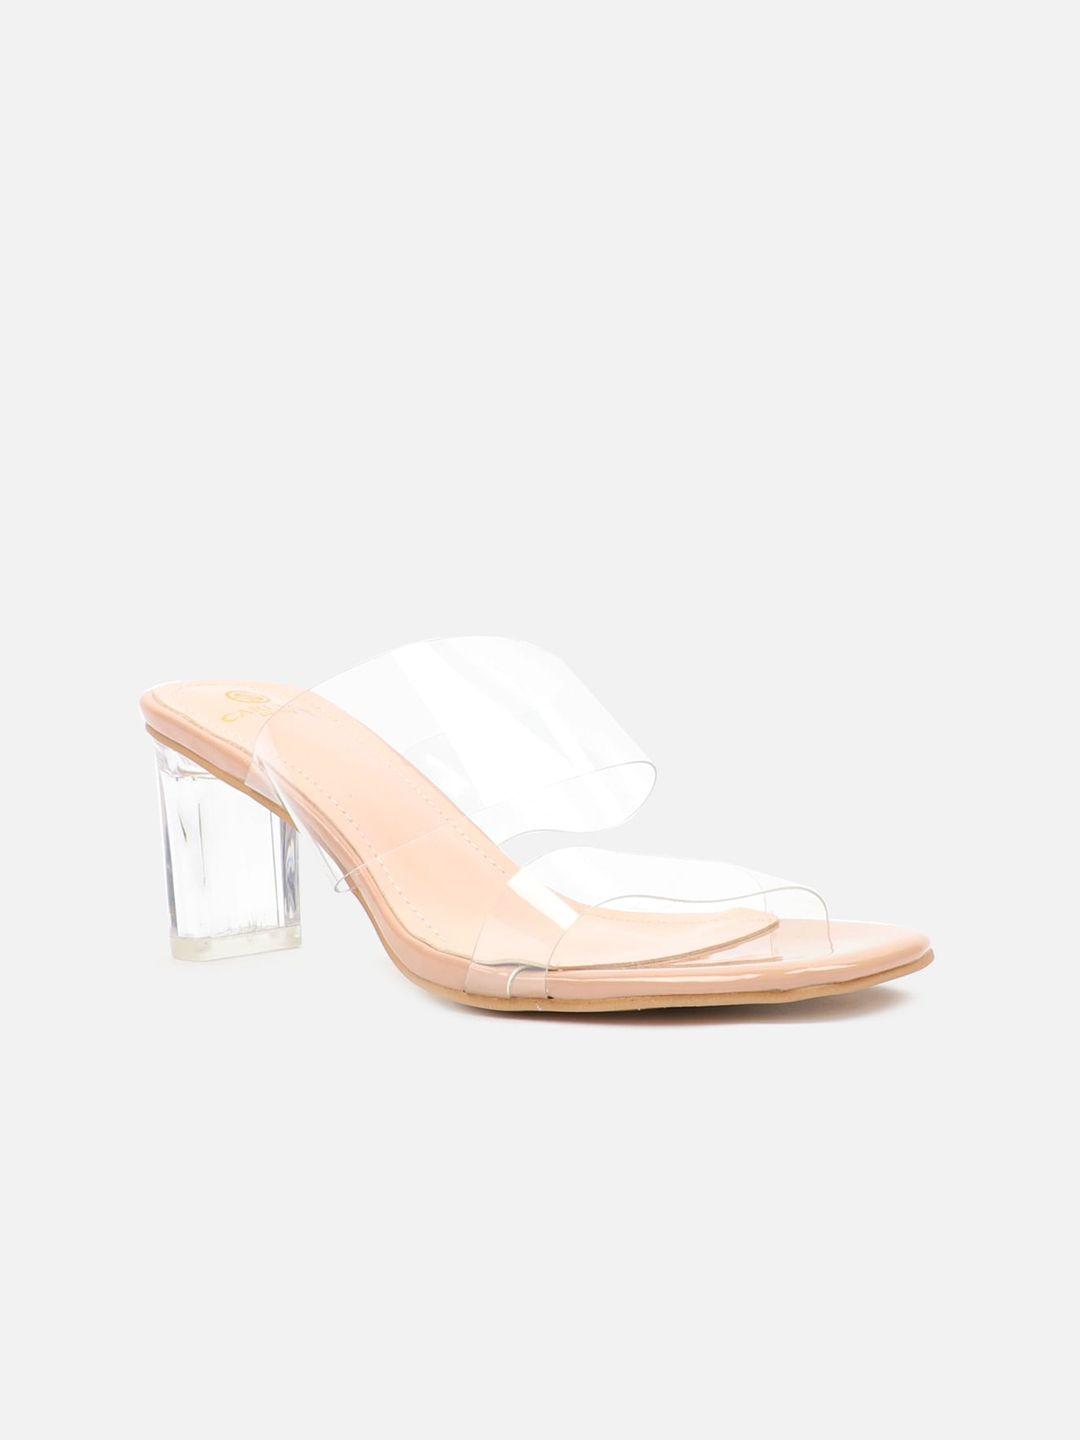 carlton london nude-coloured block heels with transparent upper straps